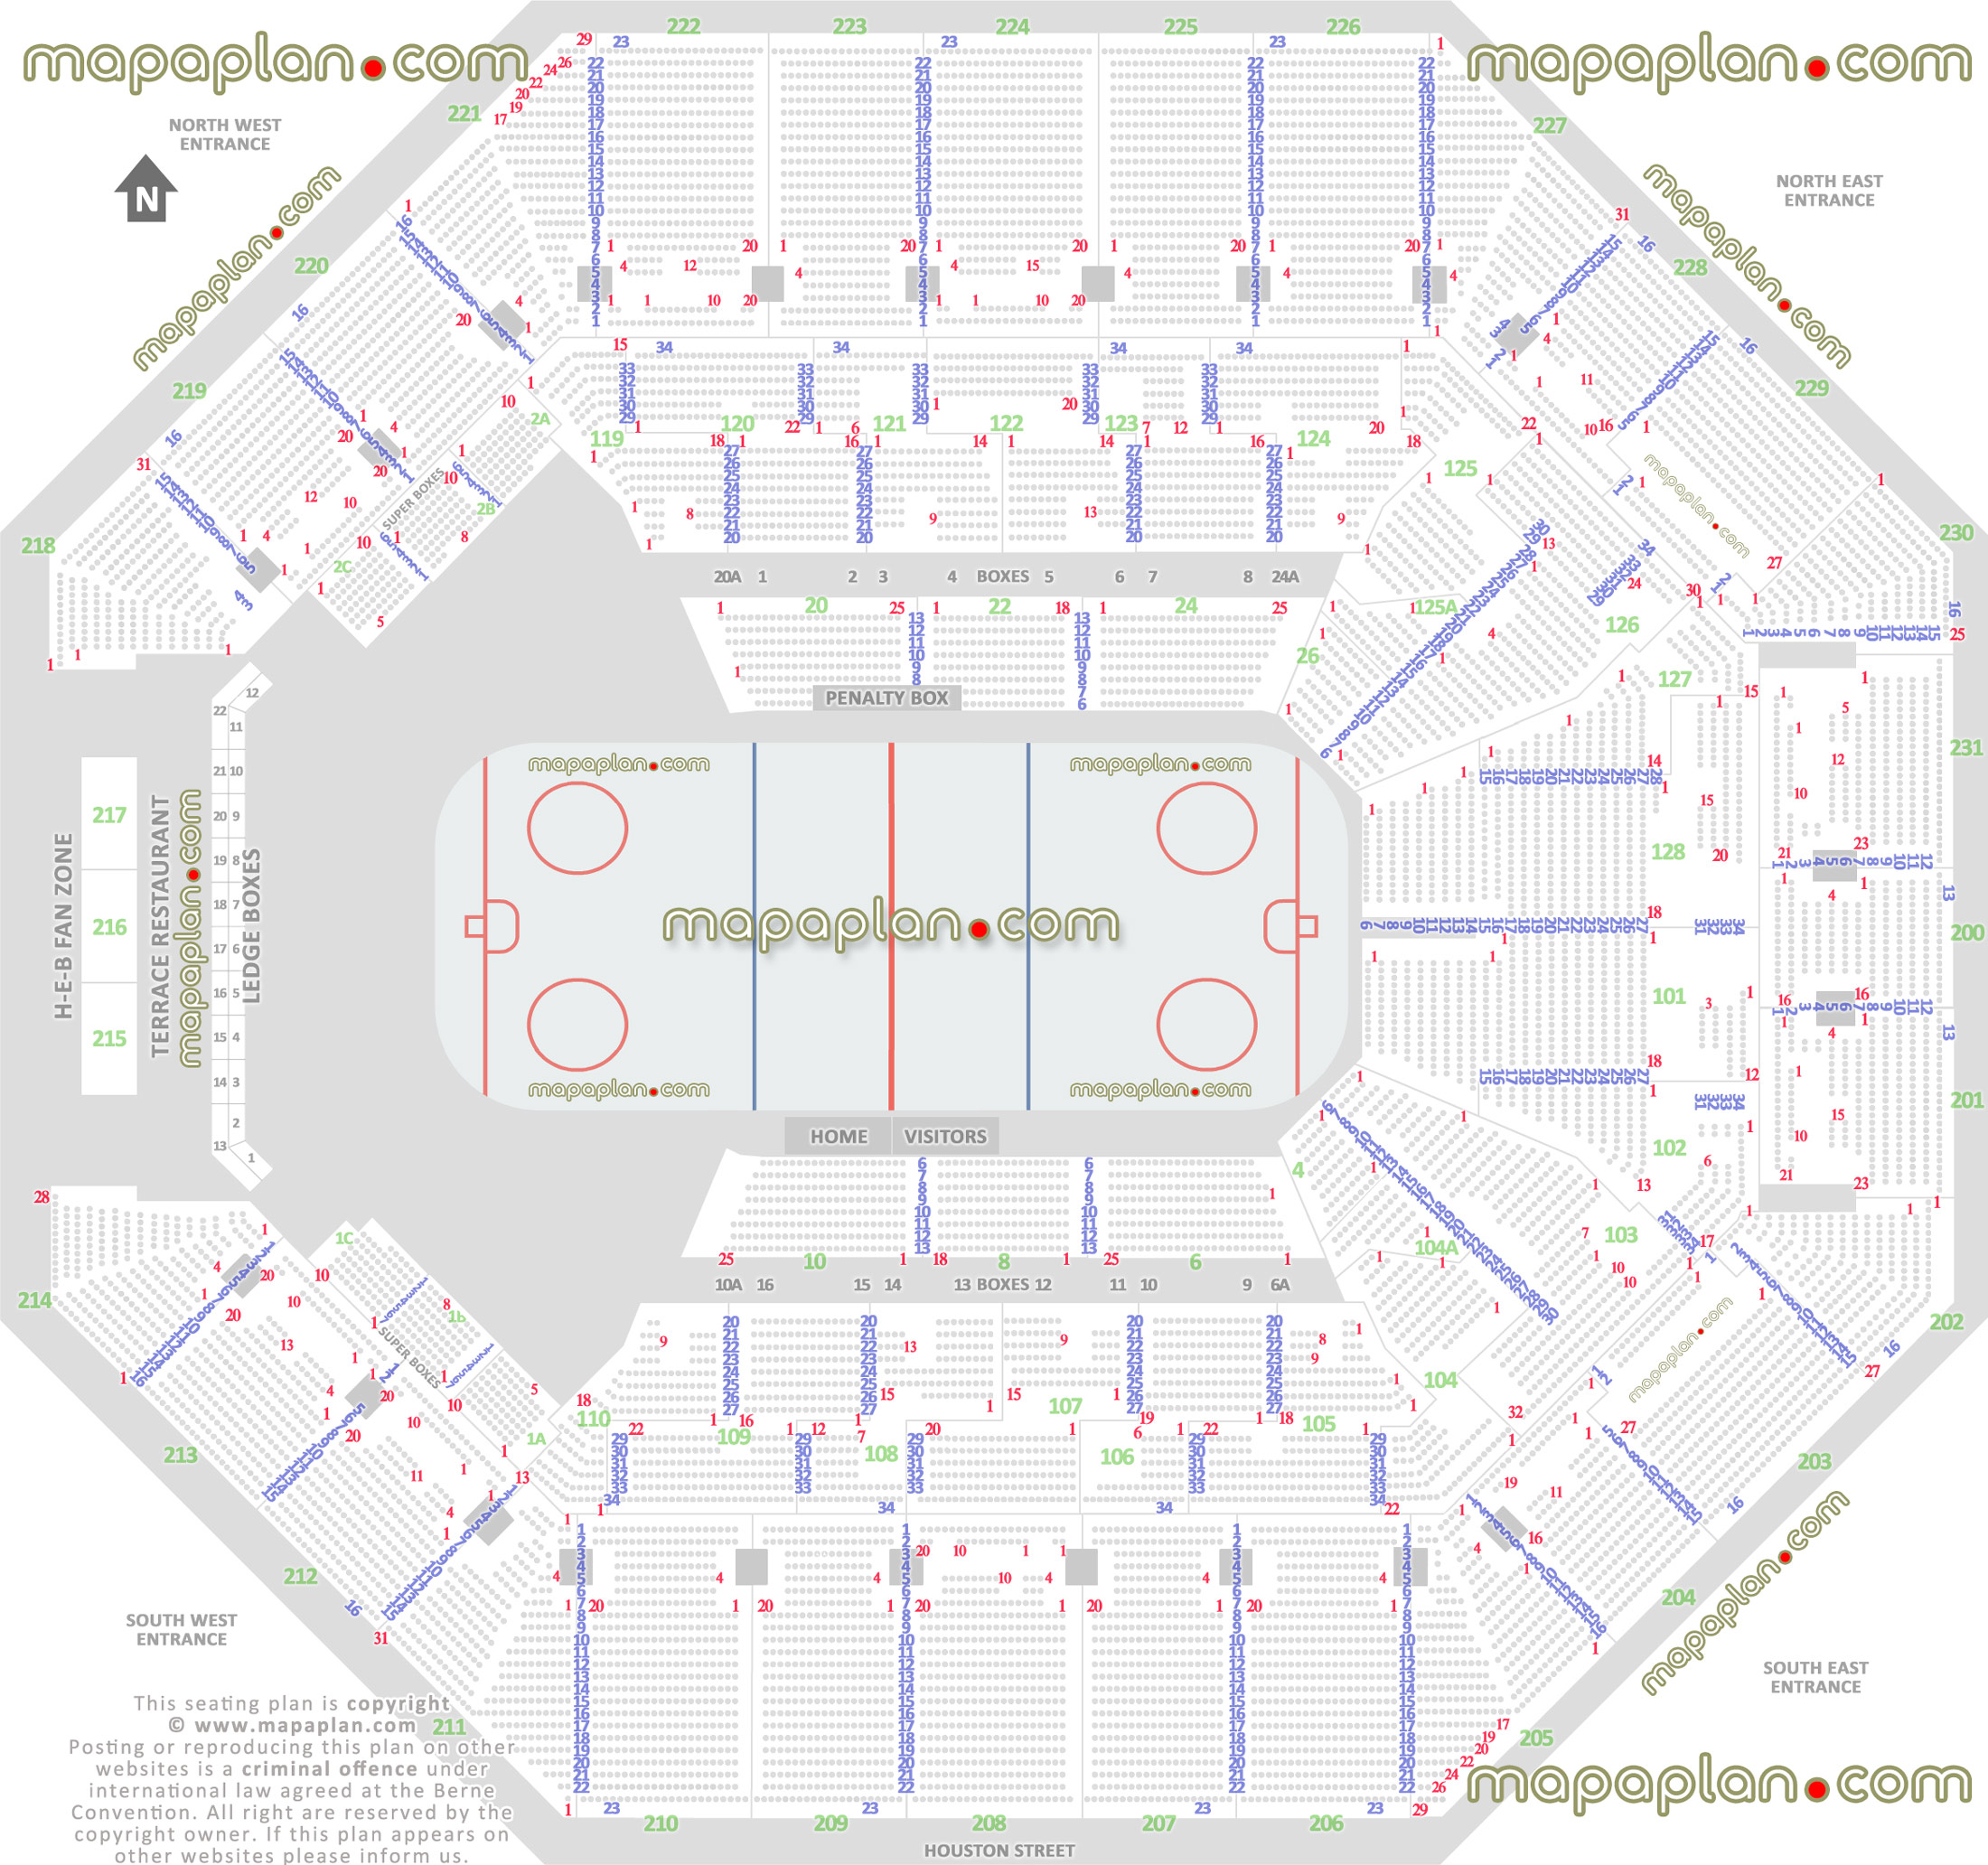 san antonio rampage ahl ice hockey seating map printable layout diagram full exact row numbers plan how seats row charter plaza terrace balcony level San Antonio Frost Bank Center seating chart